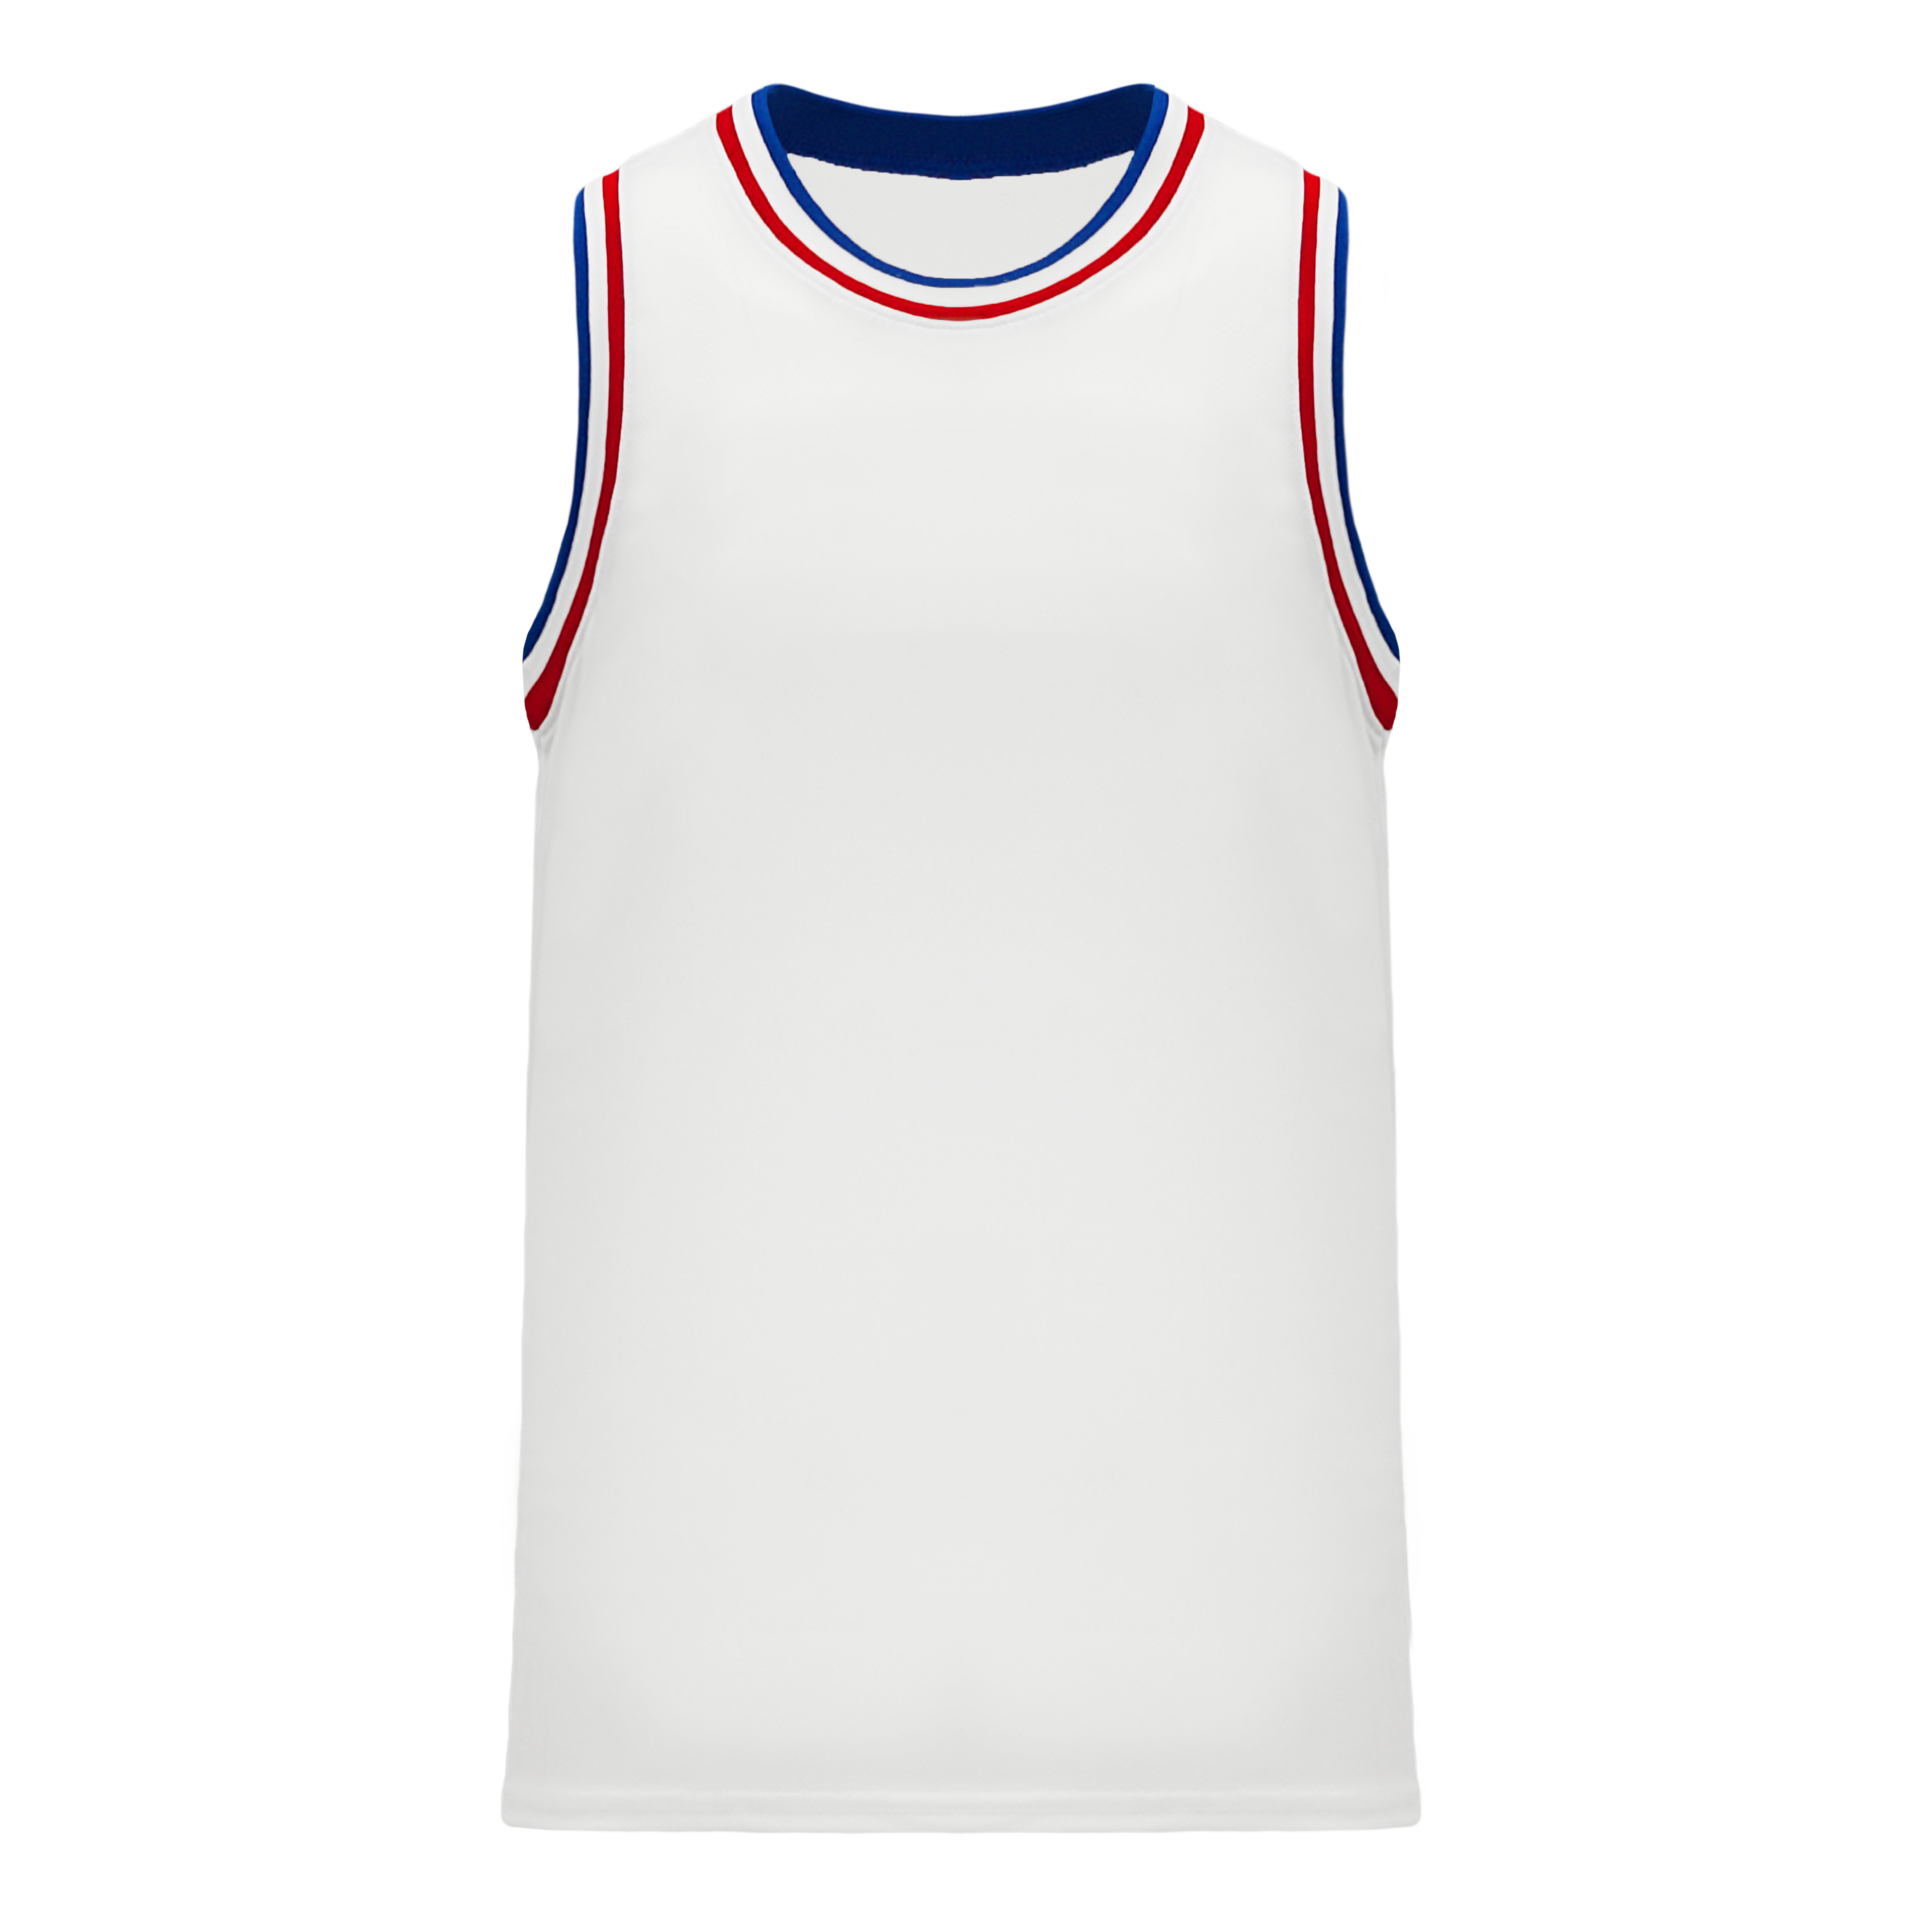 youth pistons jersey